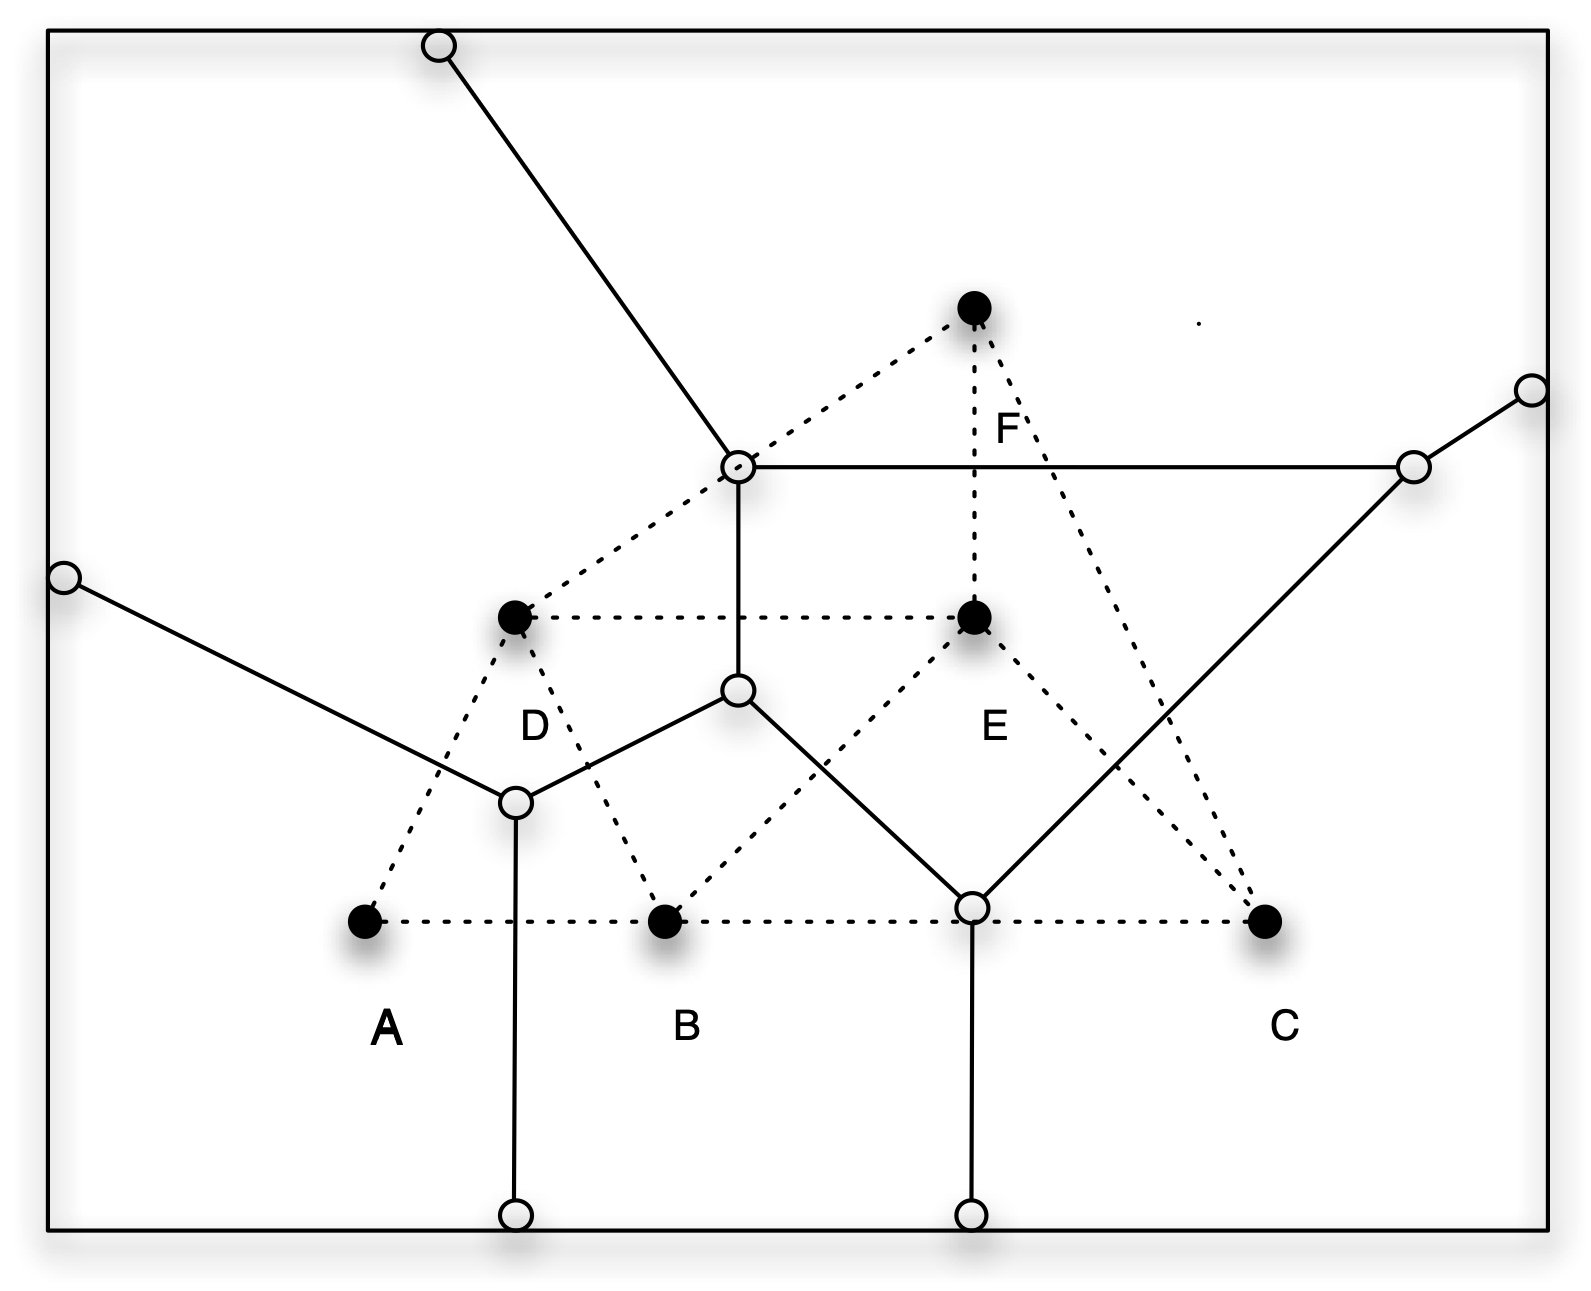 Contiguity for points from Thiessen polygons